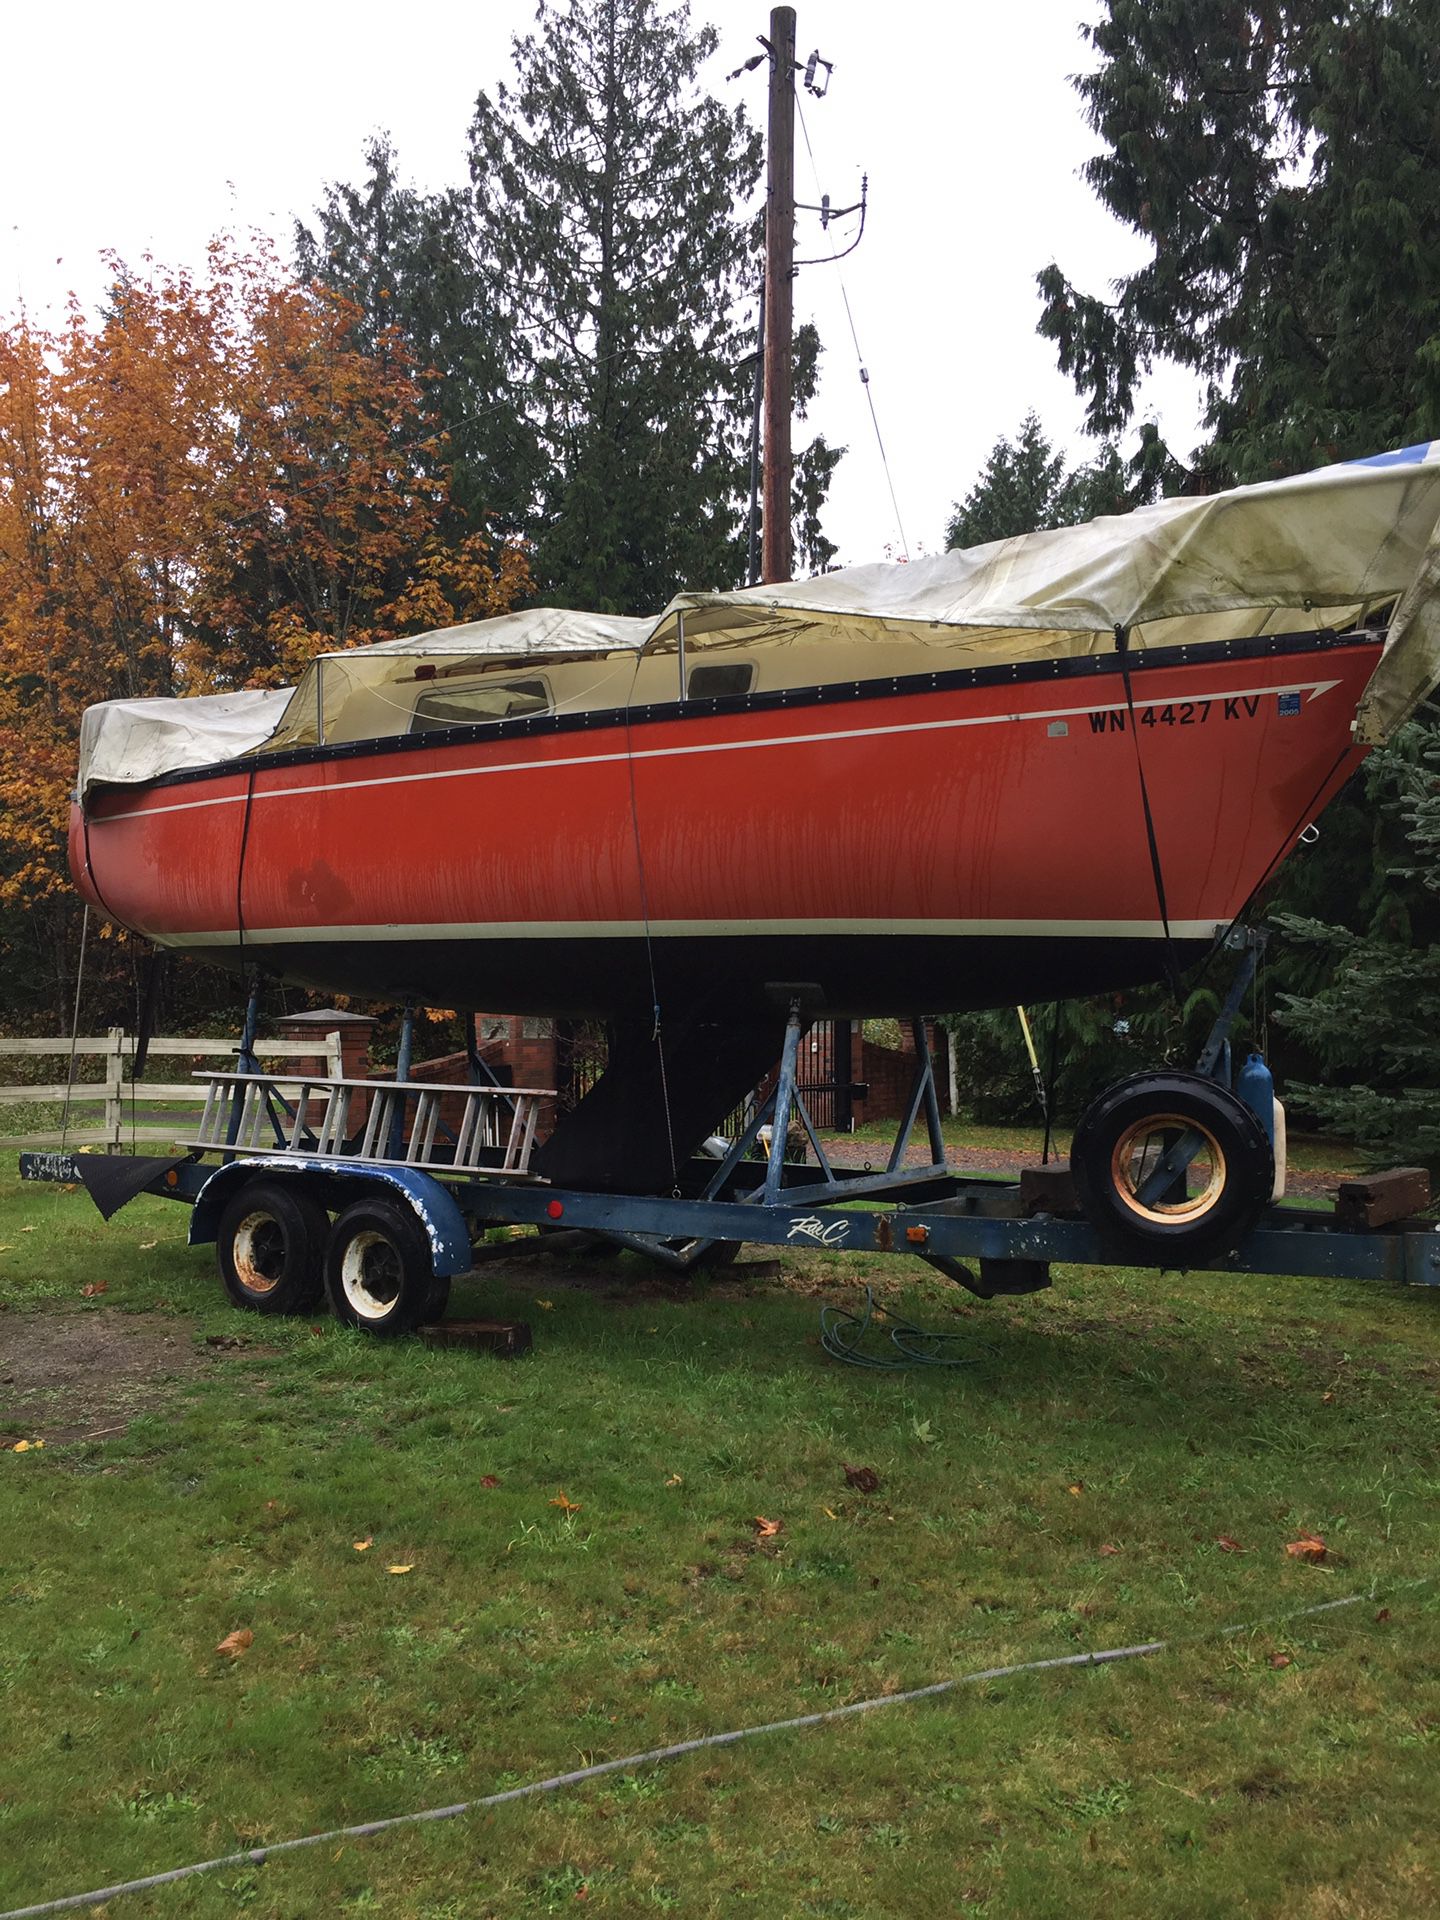 26 foot 1977 San Juan sailboat and trailer. Has a small one cylinder diesel inboard. 2 sails. selling as is